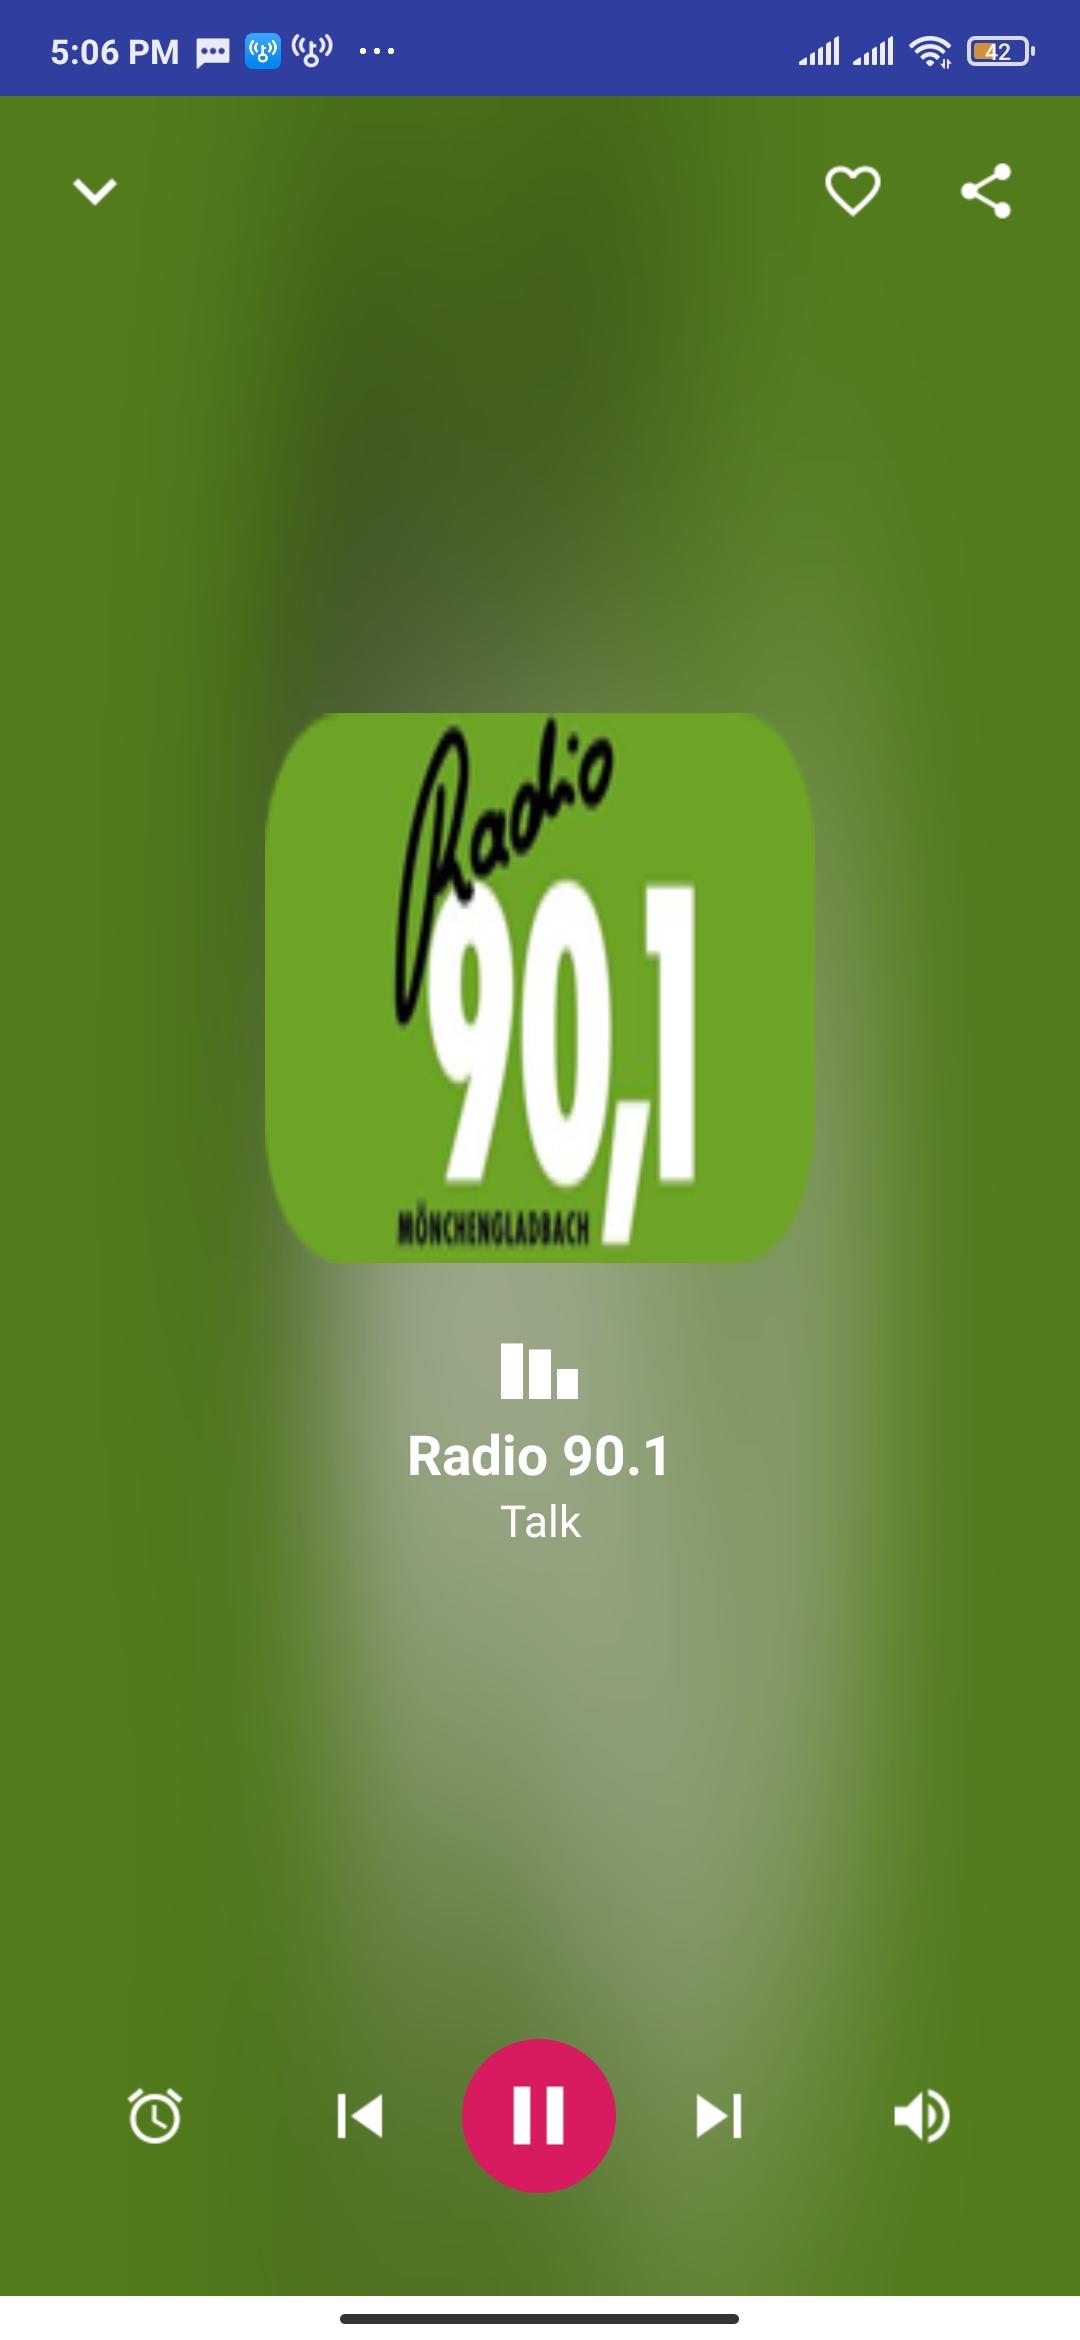 Learn German with Radio for Android - APK Download